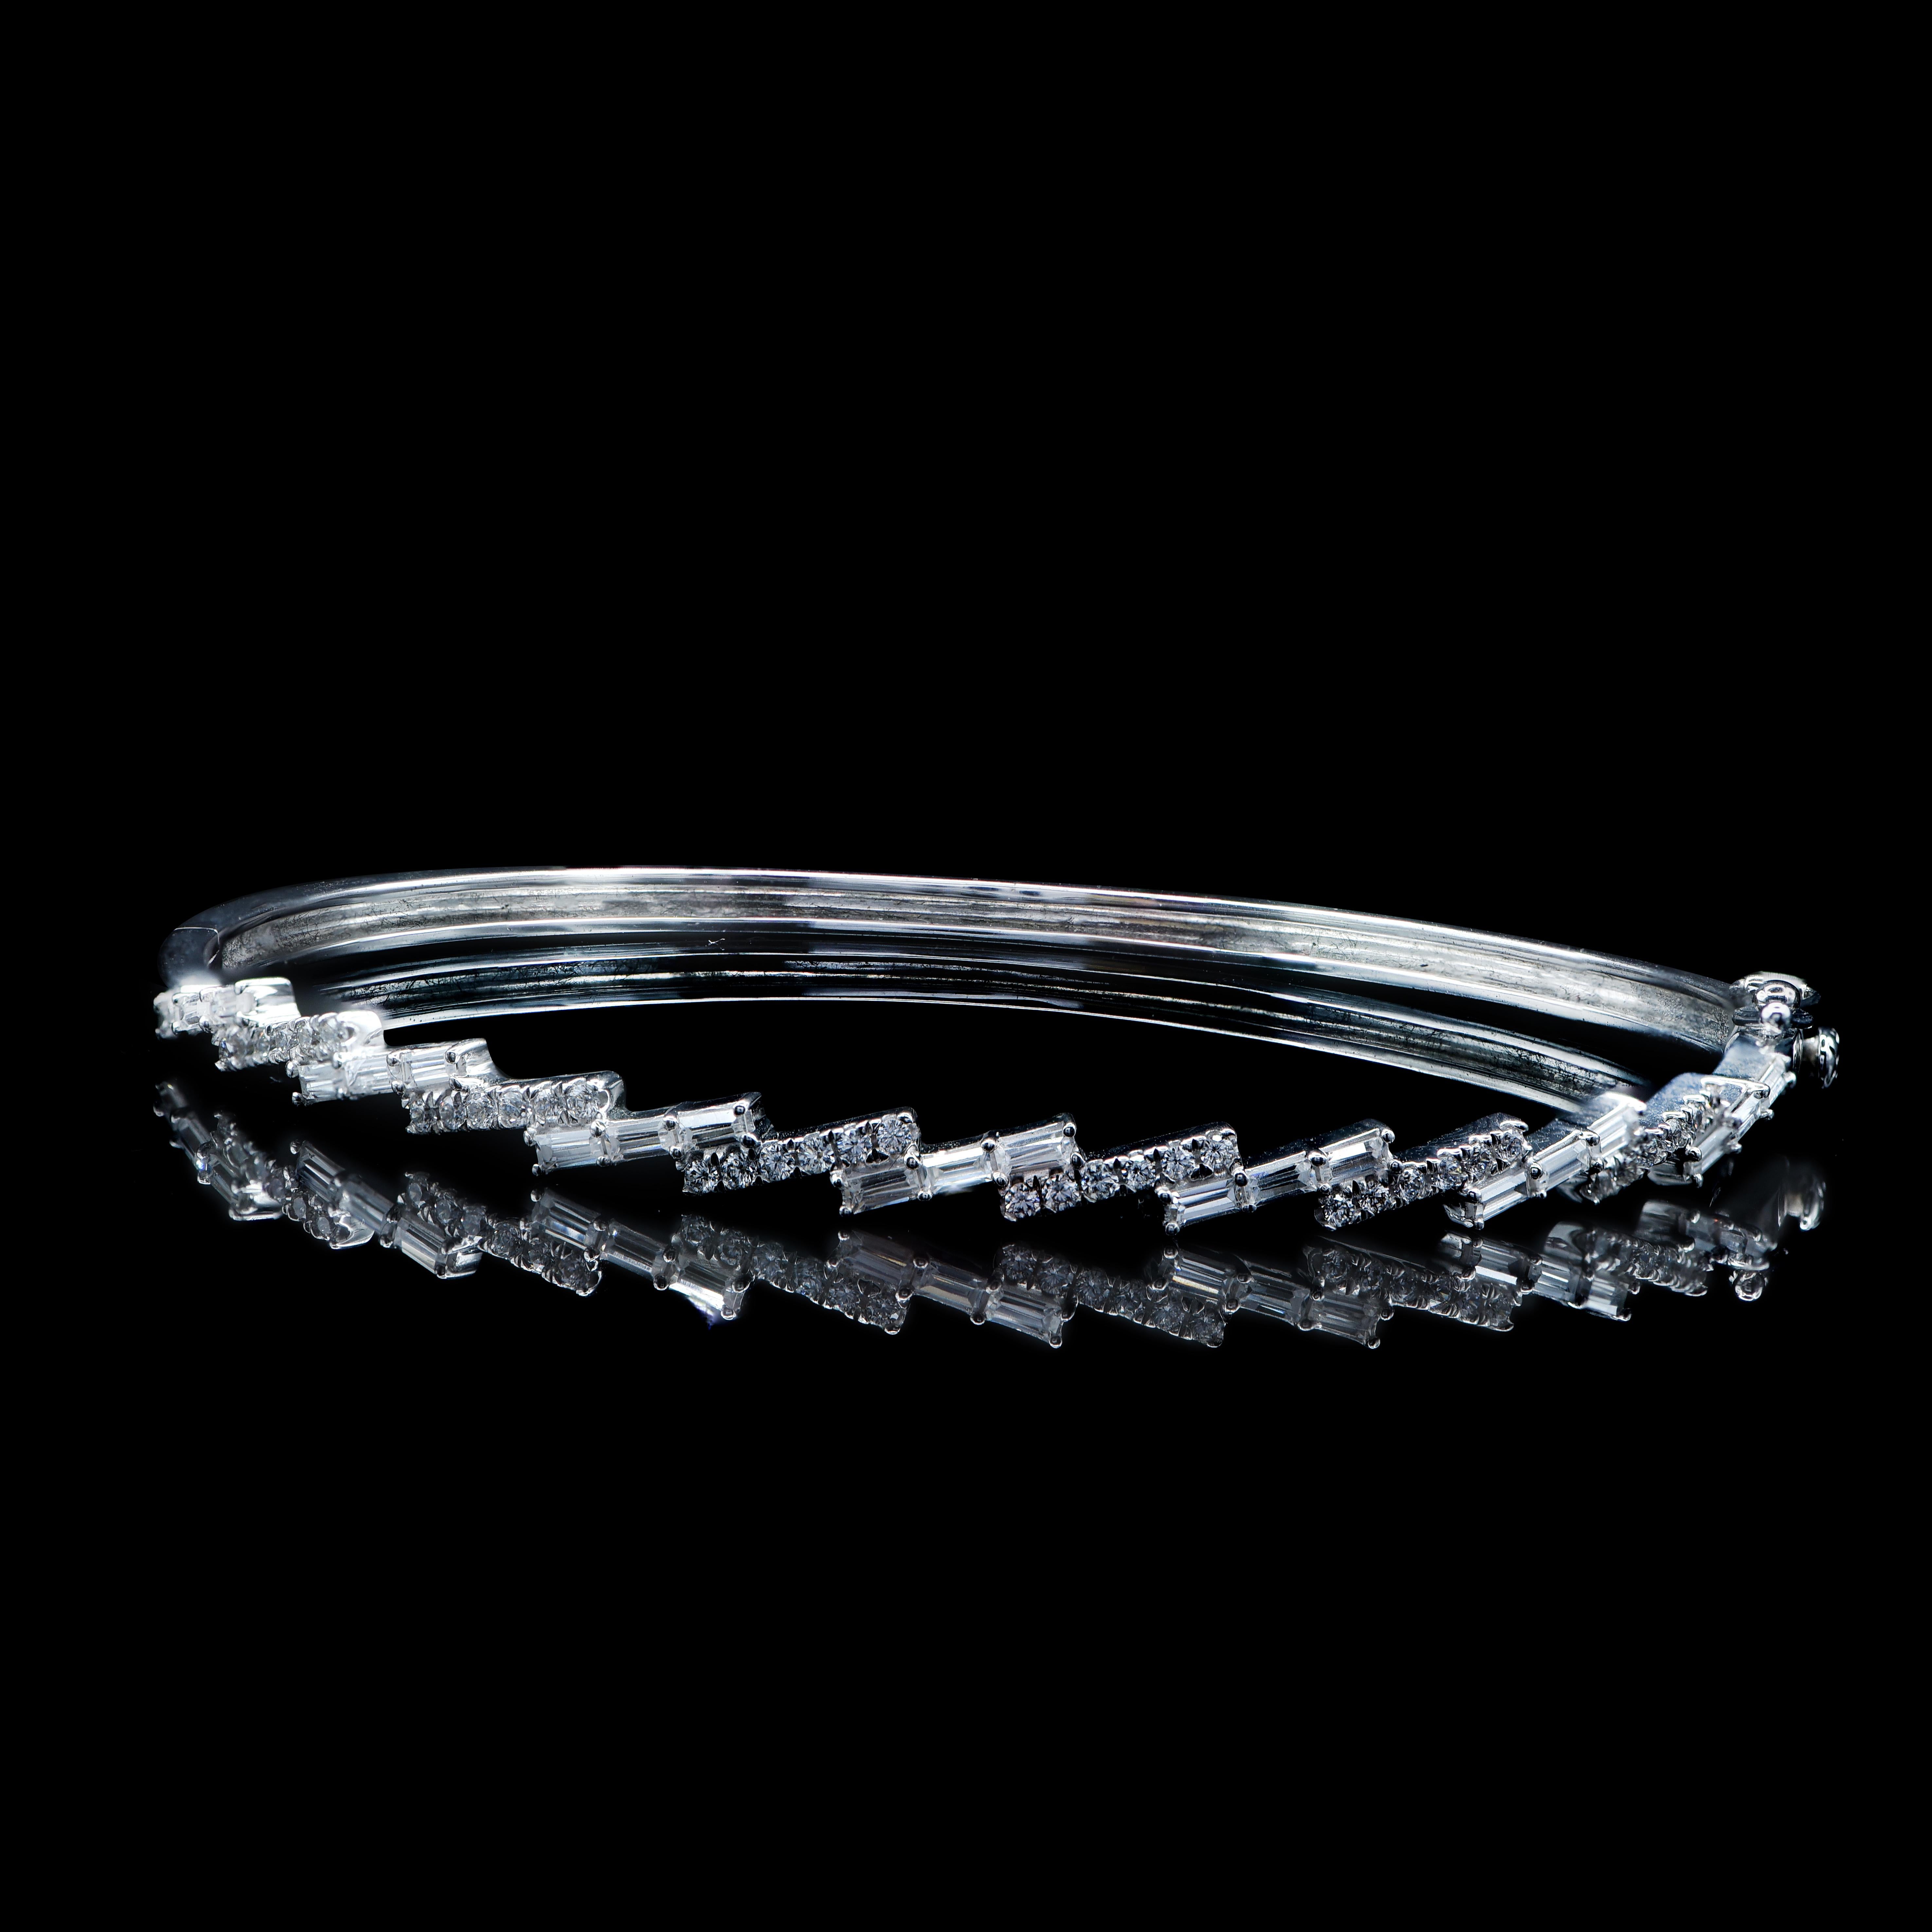 This designer bangle is made by our skillful craftsmen in 18-karat white gold and studded with 36 brilliant cut and 21 baguette-cut diamonds set in micro-prong and prong setting. The diamonds are graded H-I Color, I2 Clarity. 
The diameter of the